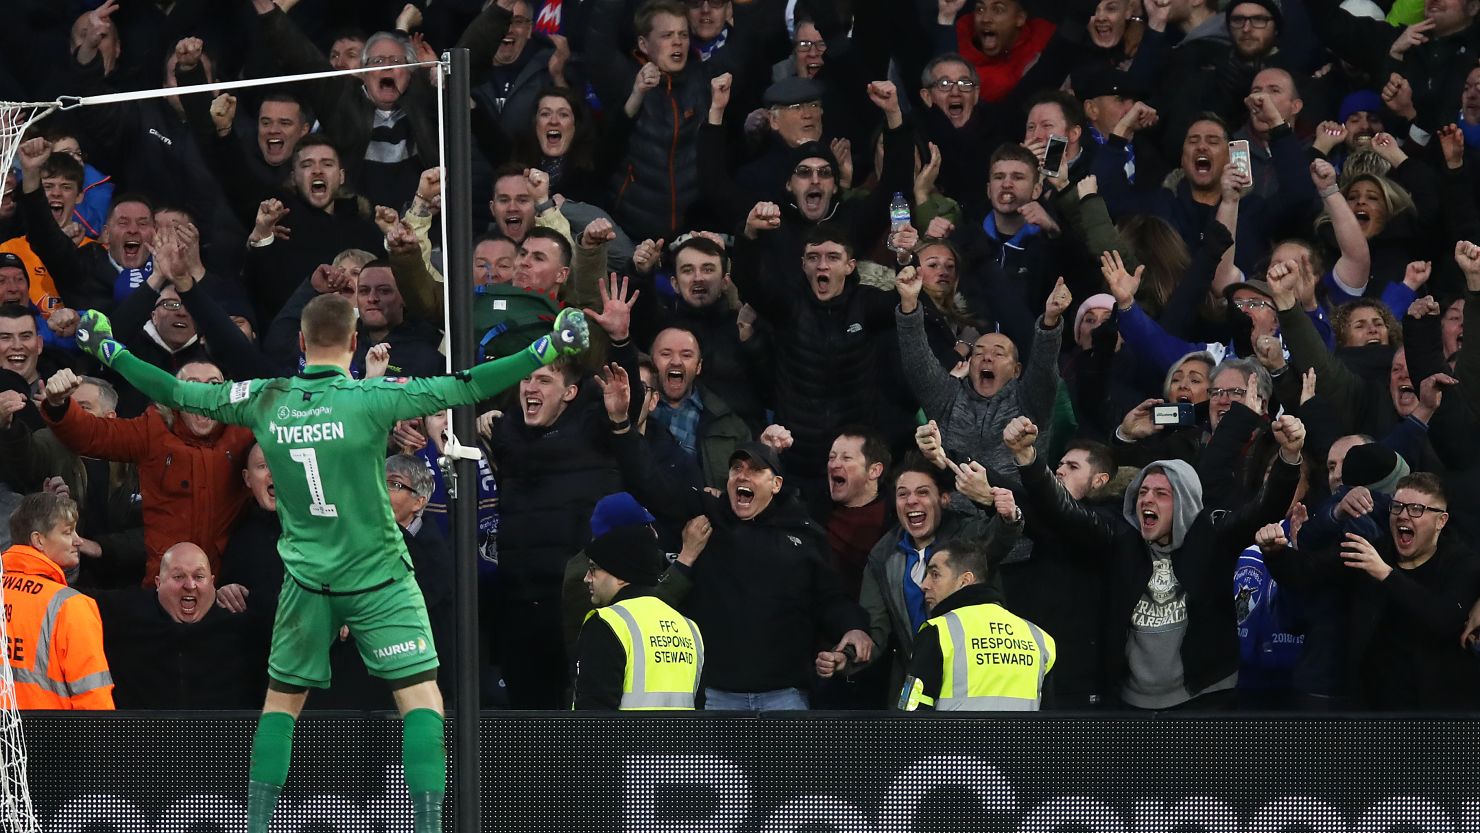 Oldham Athletic keeper Daniel Ivarsen celebrates saving a penalty from Fulahms' Aleksandar Mitrovic during their FA Cup Third Round match at Craven Cottage.